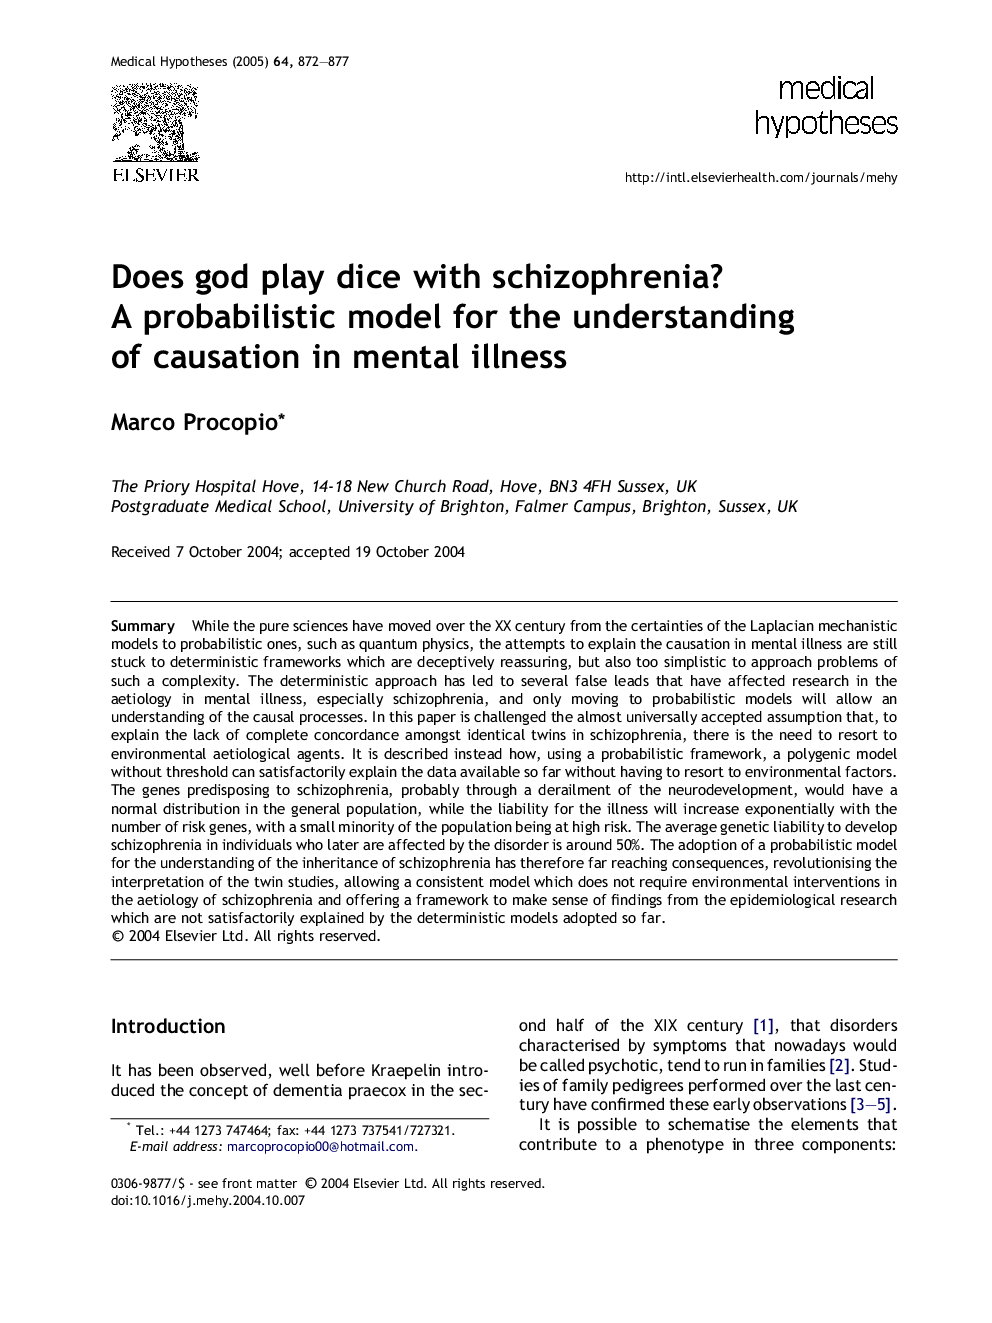 Does god play dice with schizophrenia? A probabilistic model for the understanding of causation in mental illness